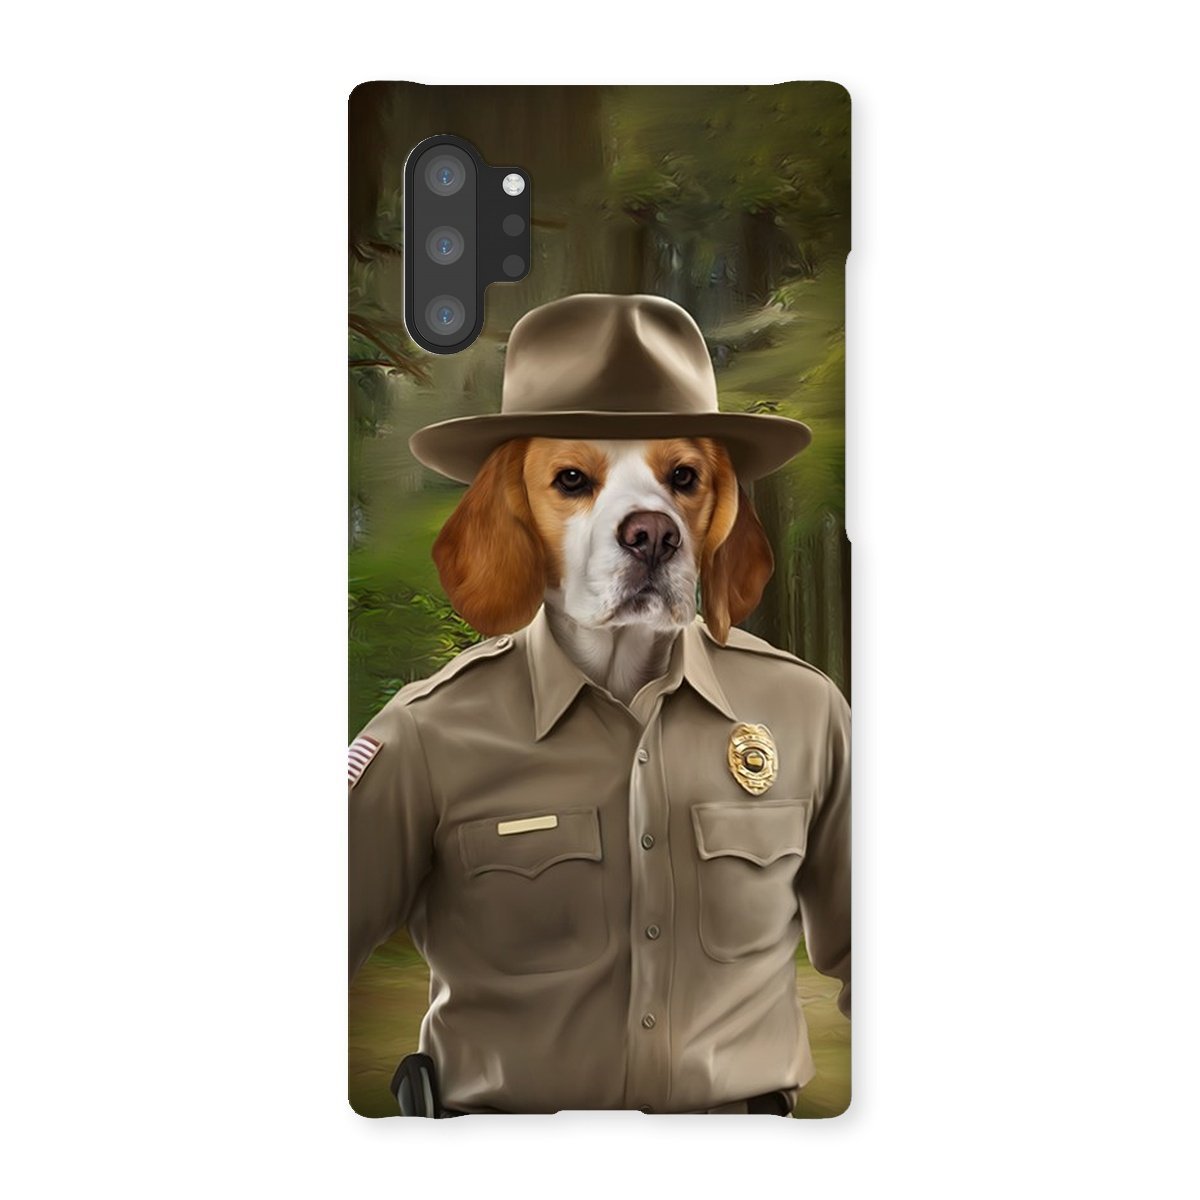 Hopper (Stranger Things Inspired): Custom Pet Phone Case - Paw & Glory - pawandglory, custom pet phone case, puppy phone case, iphone 11 case dogs, personalised puppy phone case, life is better with a dog phone case, dog and owner phone case, Pet Portraits phone case,